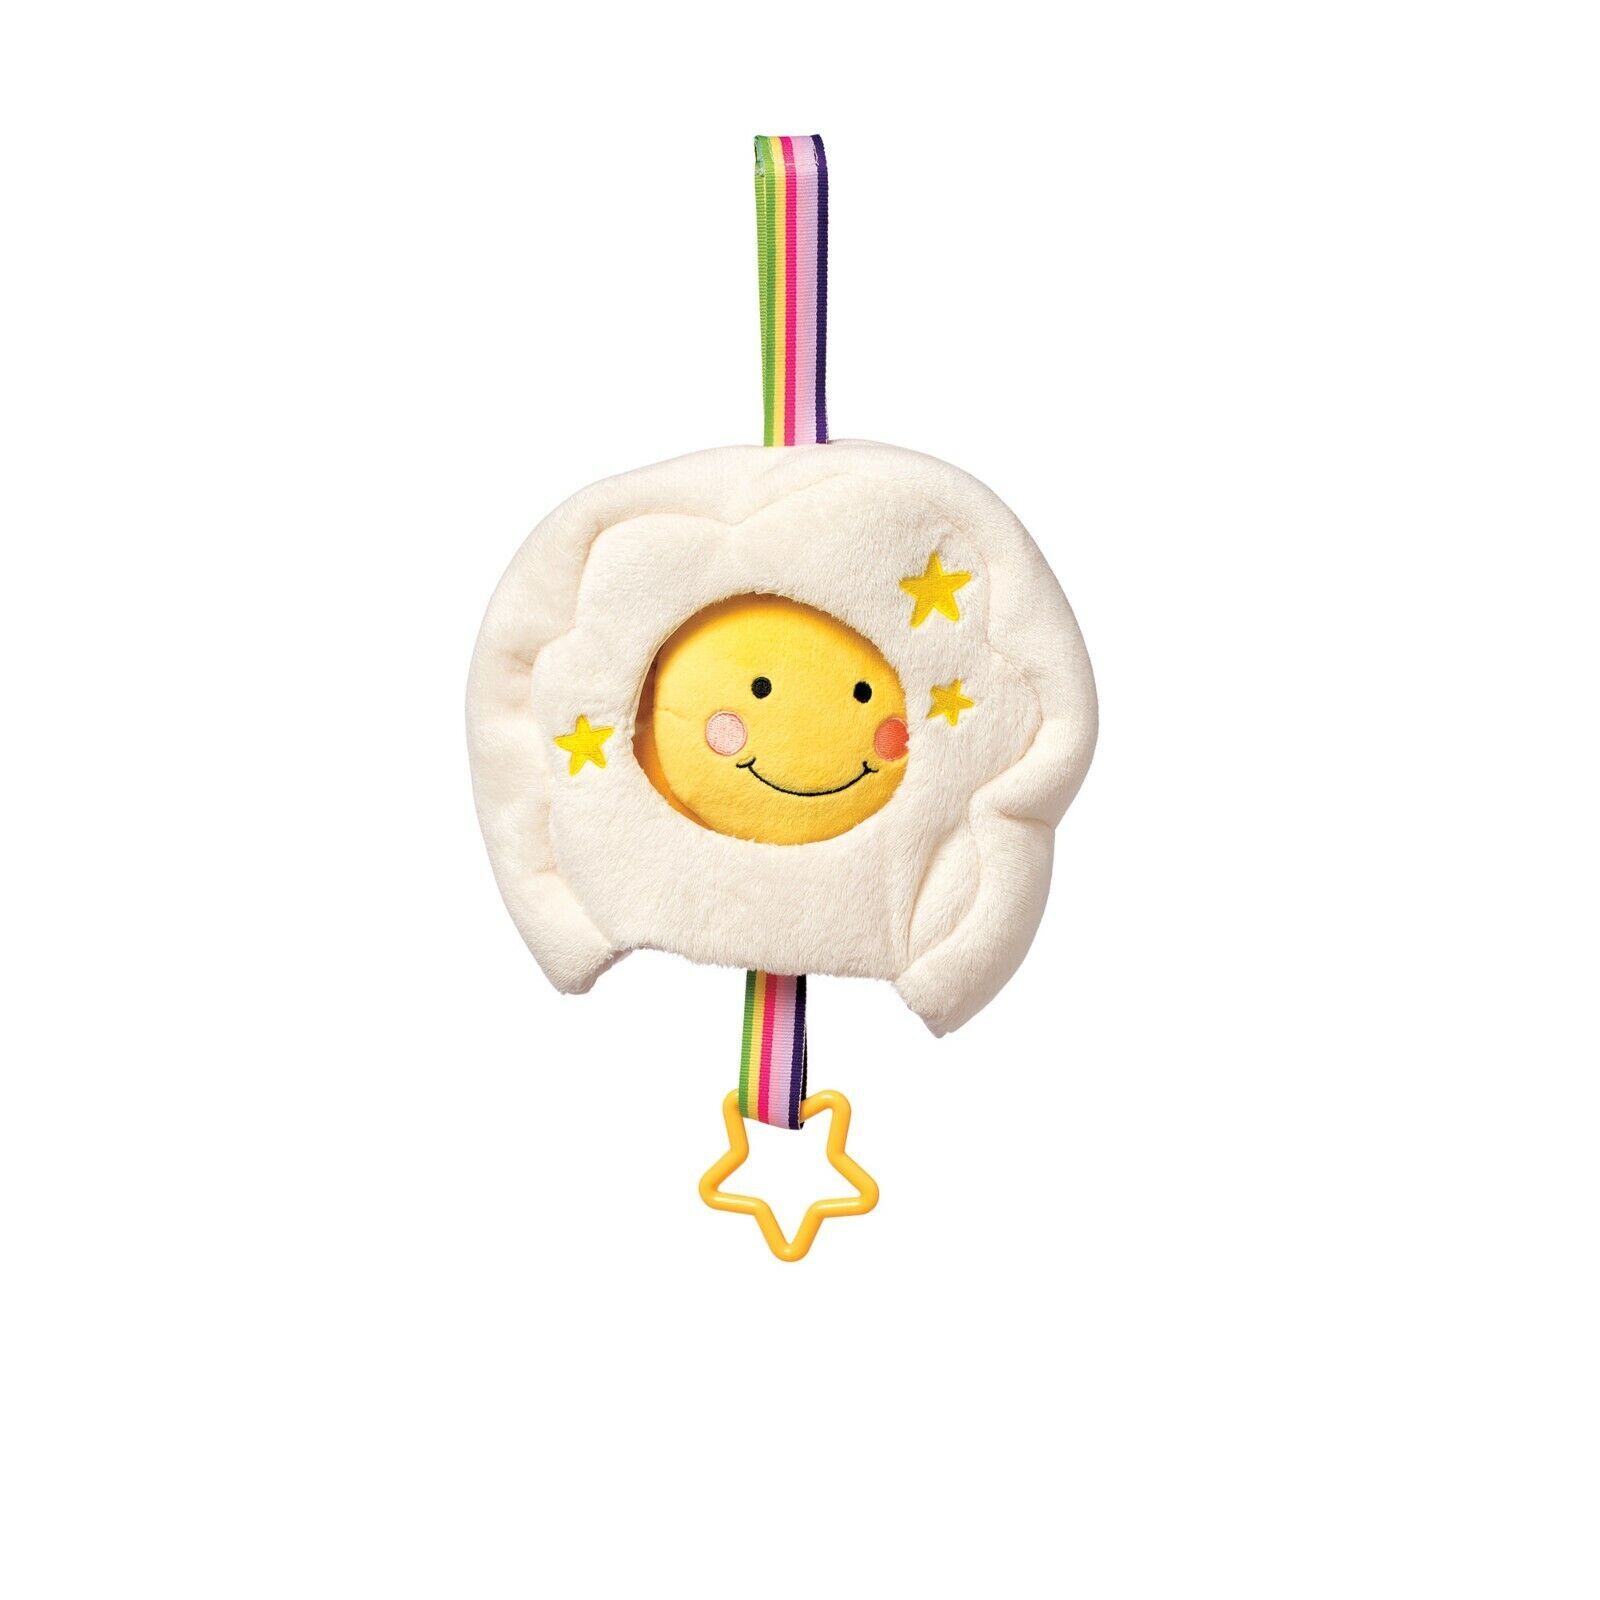 Manhattan Toy Lullaby Cloud sun musical plush pull crib toy Twinkle little star - $29.69